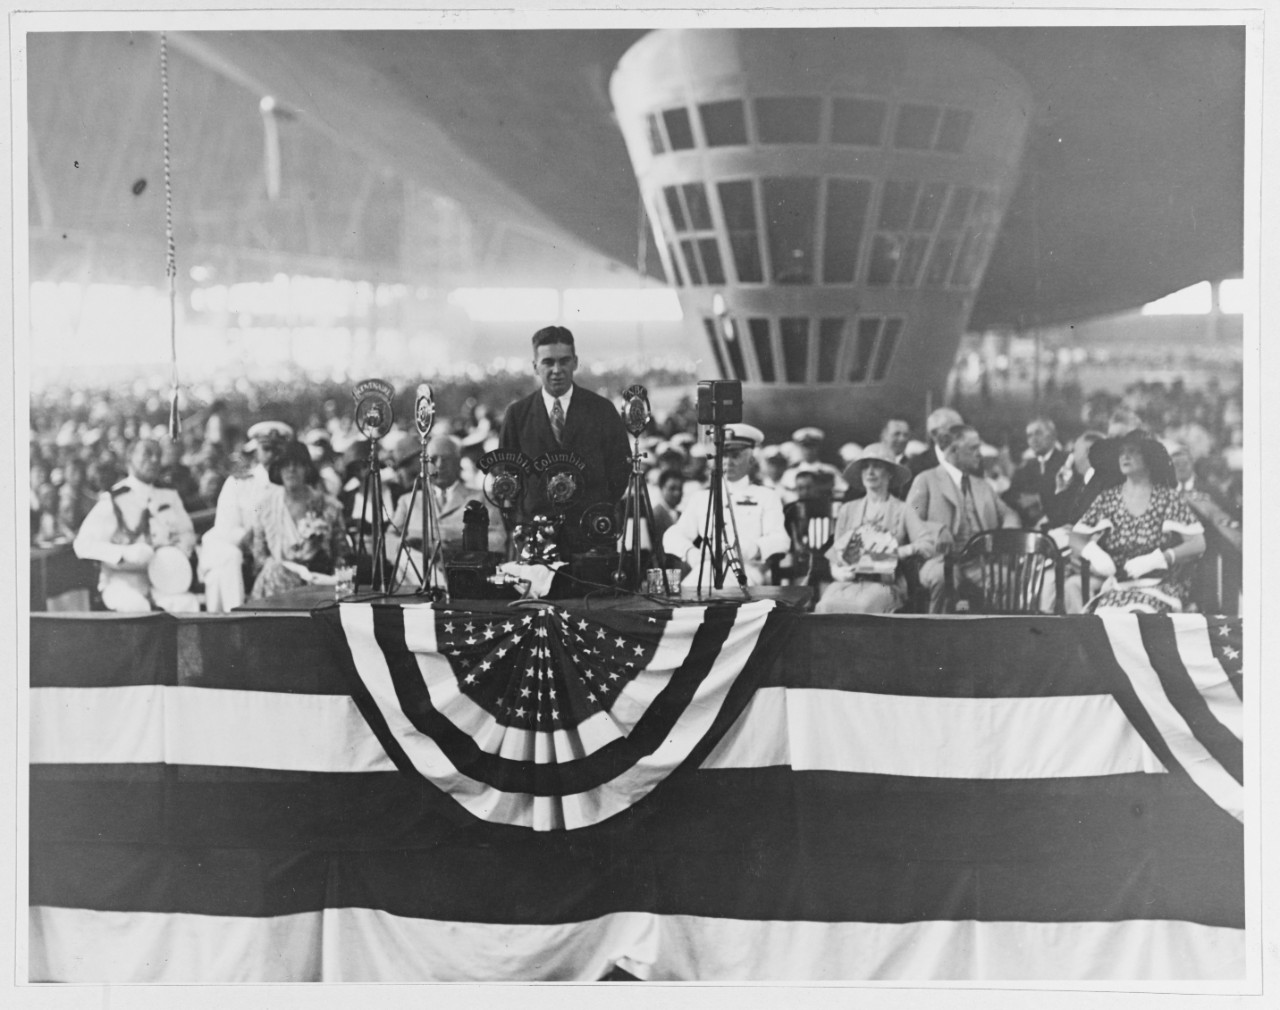 Photo #: NH 42166  Christening of USS Akron (ZRS-4), 8 August 1931